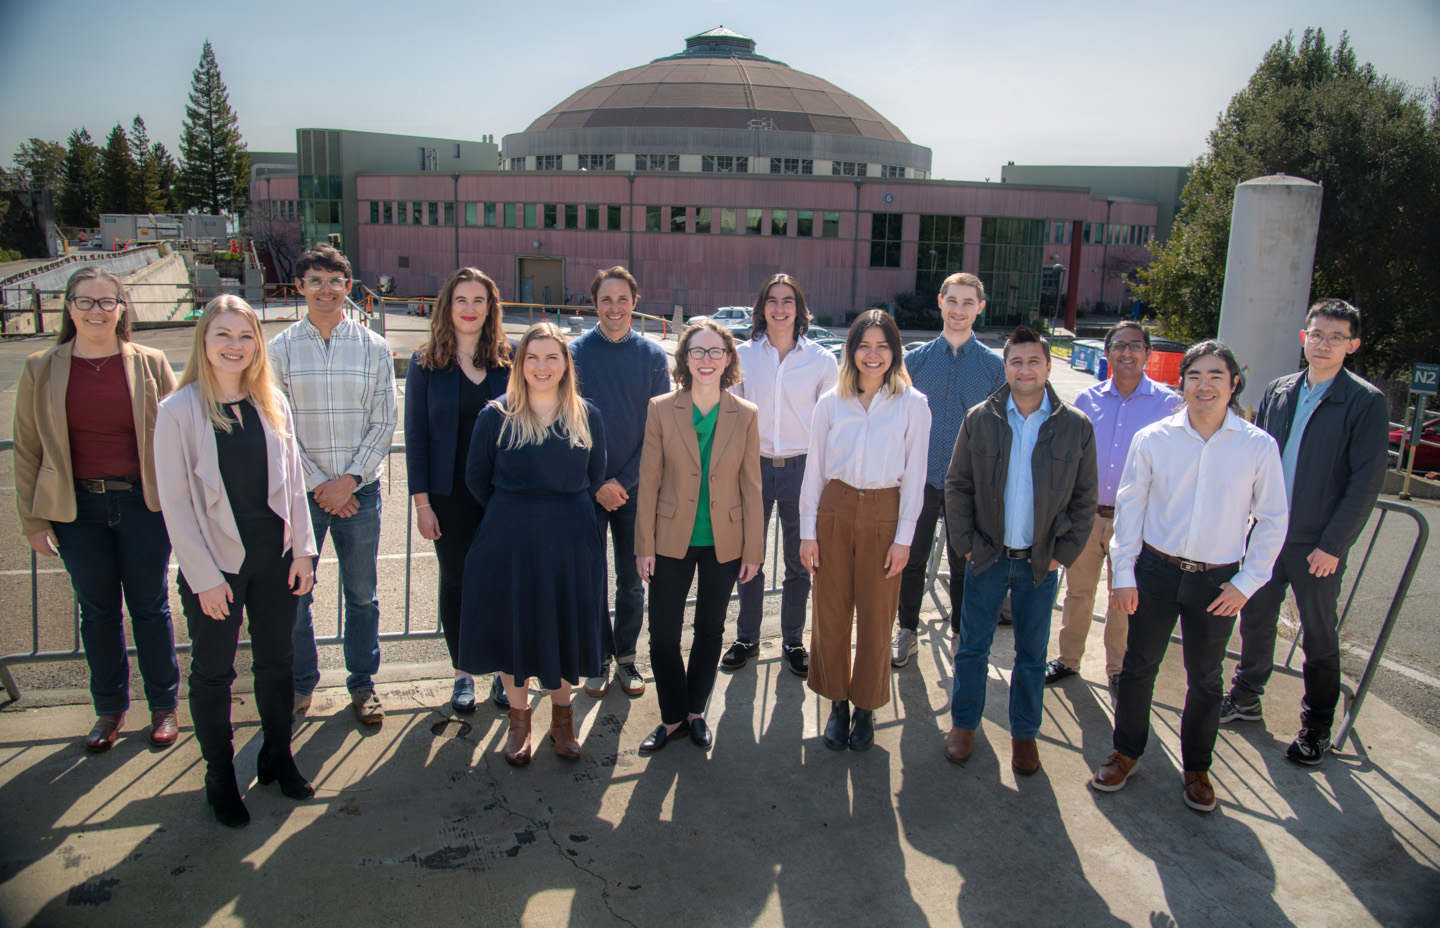 Berkeley Lab’s Technoeconomic Analysis Team, a group of 14 people stand outside for a photo, with the Advanced Light Source visible in the background.